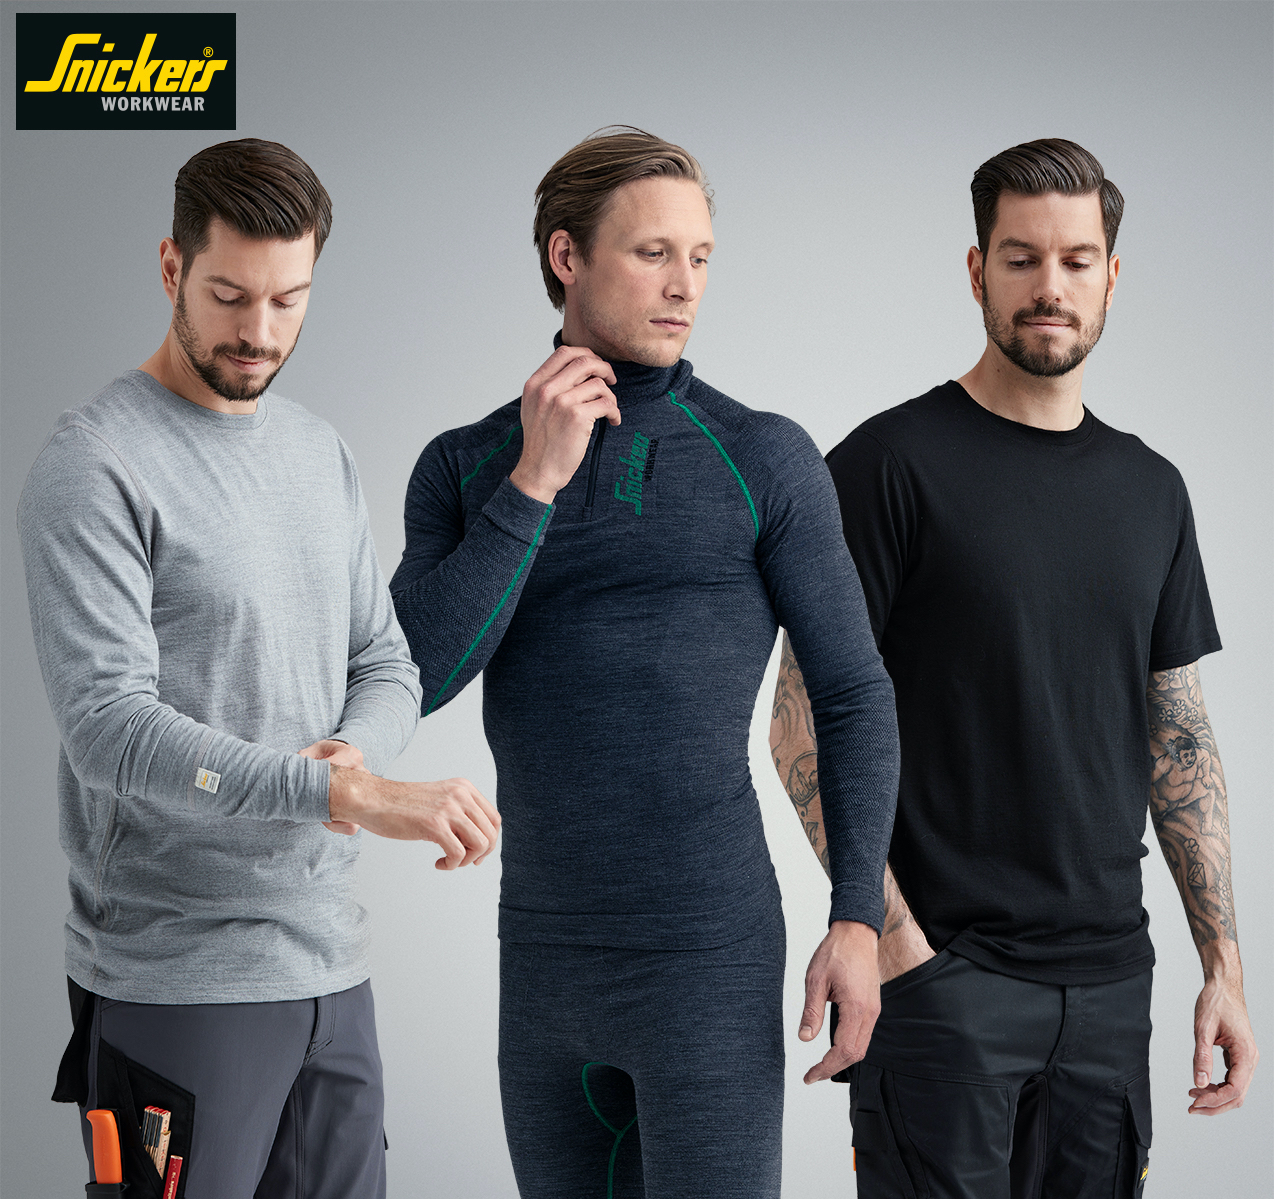 Snickers Workwear Sustainable Merino Wool Clothing @SnickersWw_UK